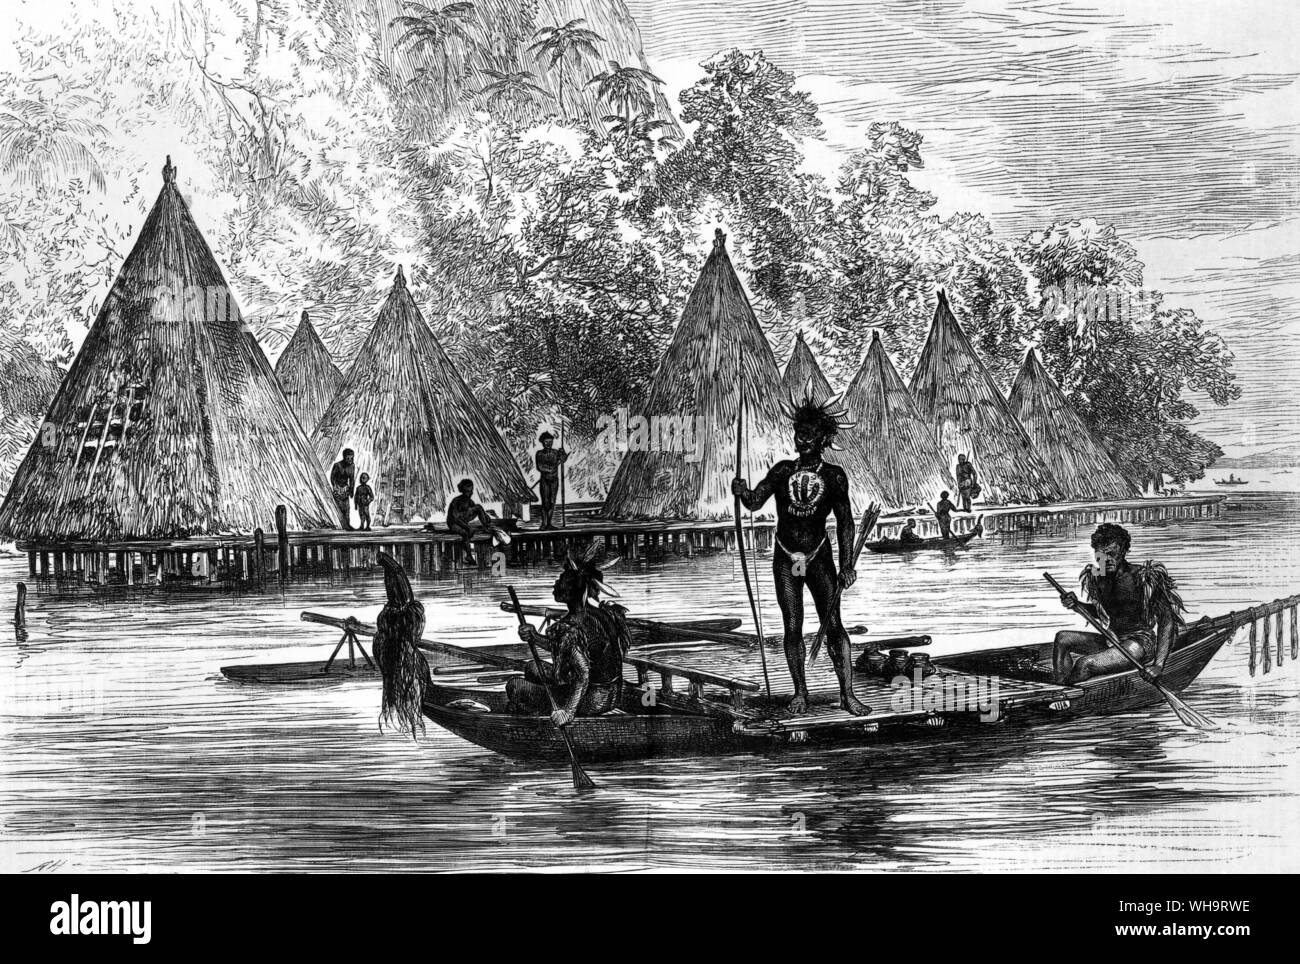 Tribesmen on African river. 19th century. Stock Photo